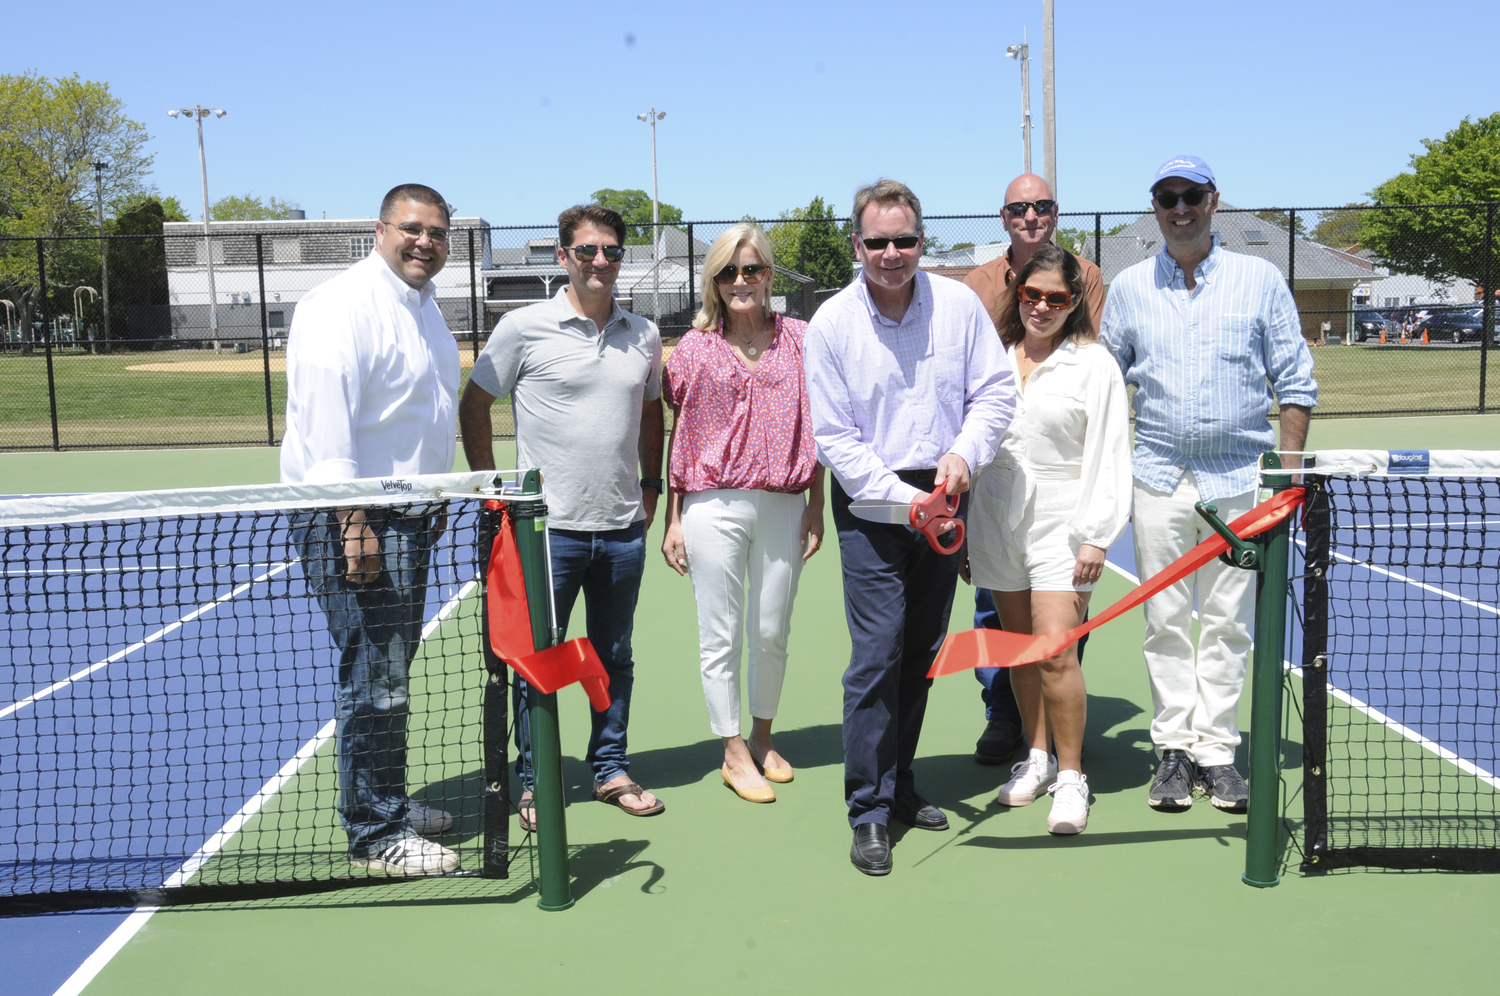 East Hampton Village Administrator Marcos Baladron; Village Deputy Mayor Chris Minardi; Village Trustee Sarah Amaden, Village Mayor Jerry Larsen; Village Trustee Sandra Melendez; Village Foundation Chairman and CEO Bradford Billet and, rear, Village Department of Public Works Superintendent David Collins cut the ribbon on the reconstructed tennis court in Herrick Park on Saturday to announce the completion of 